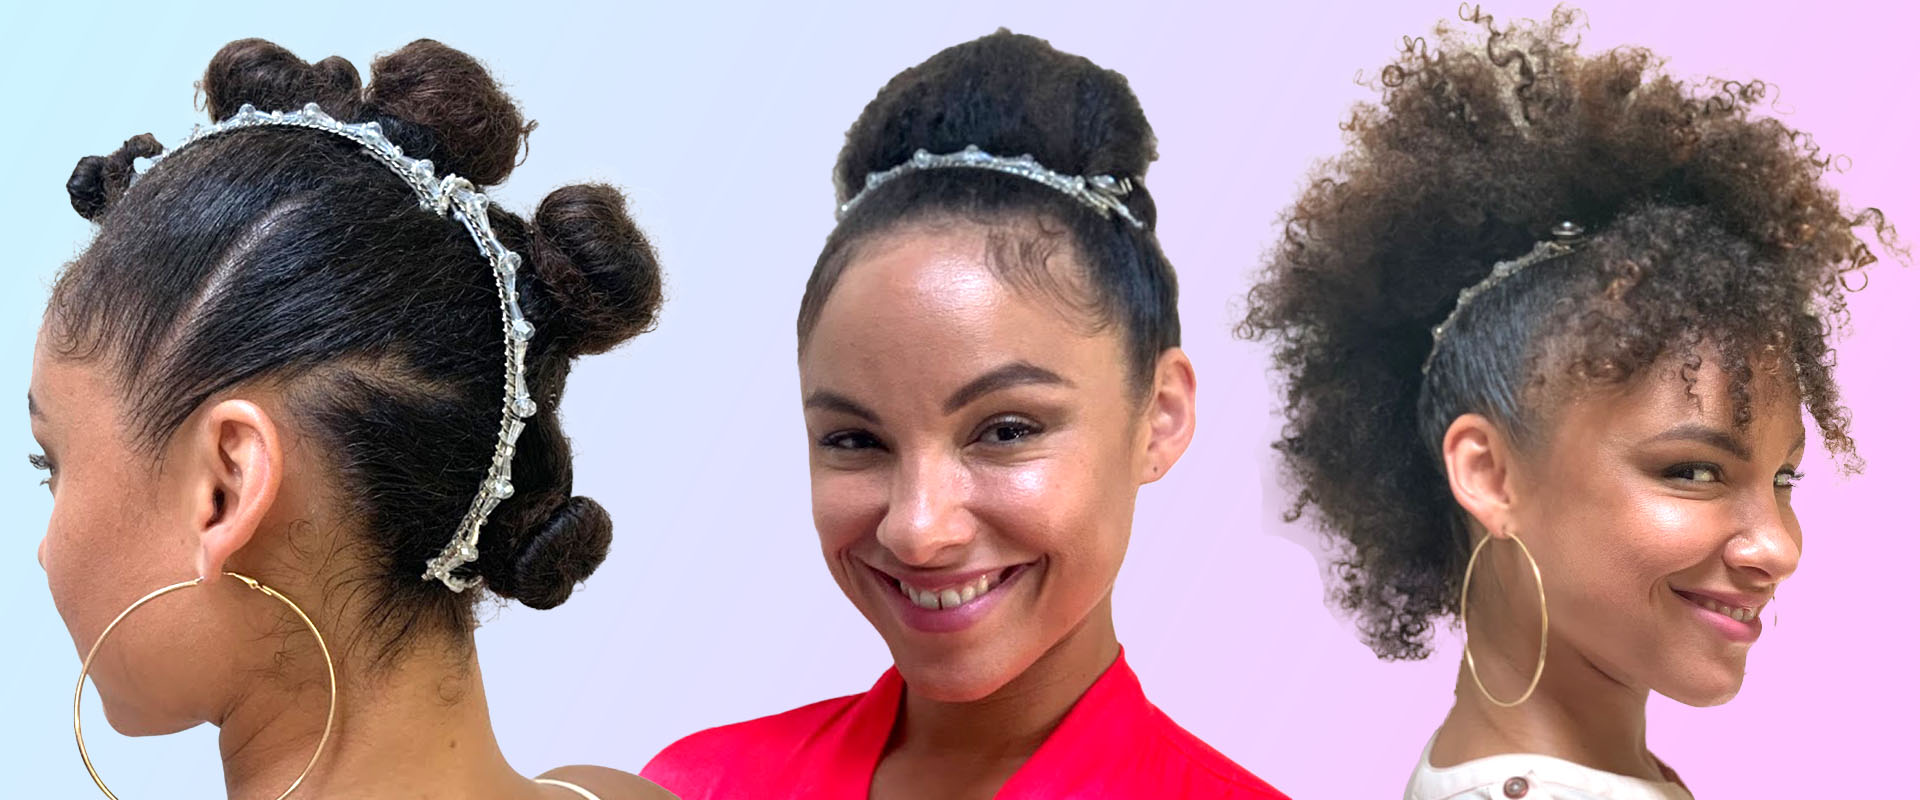 7 Easy Banana Clip Hairstyles For Every Occasion